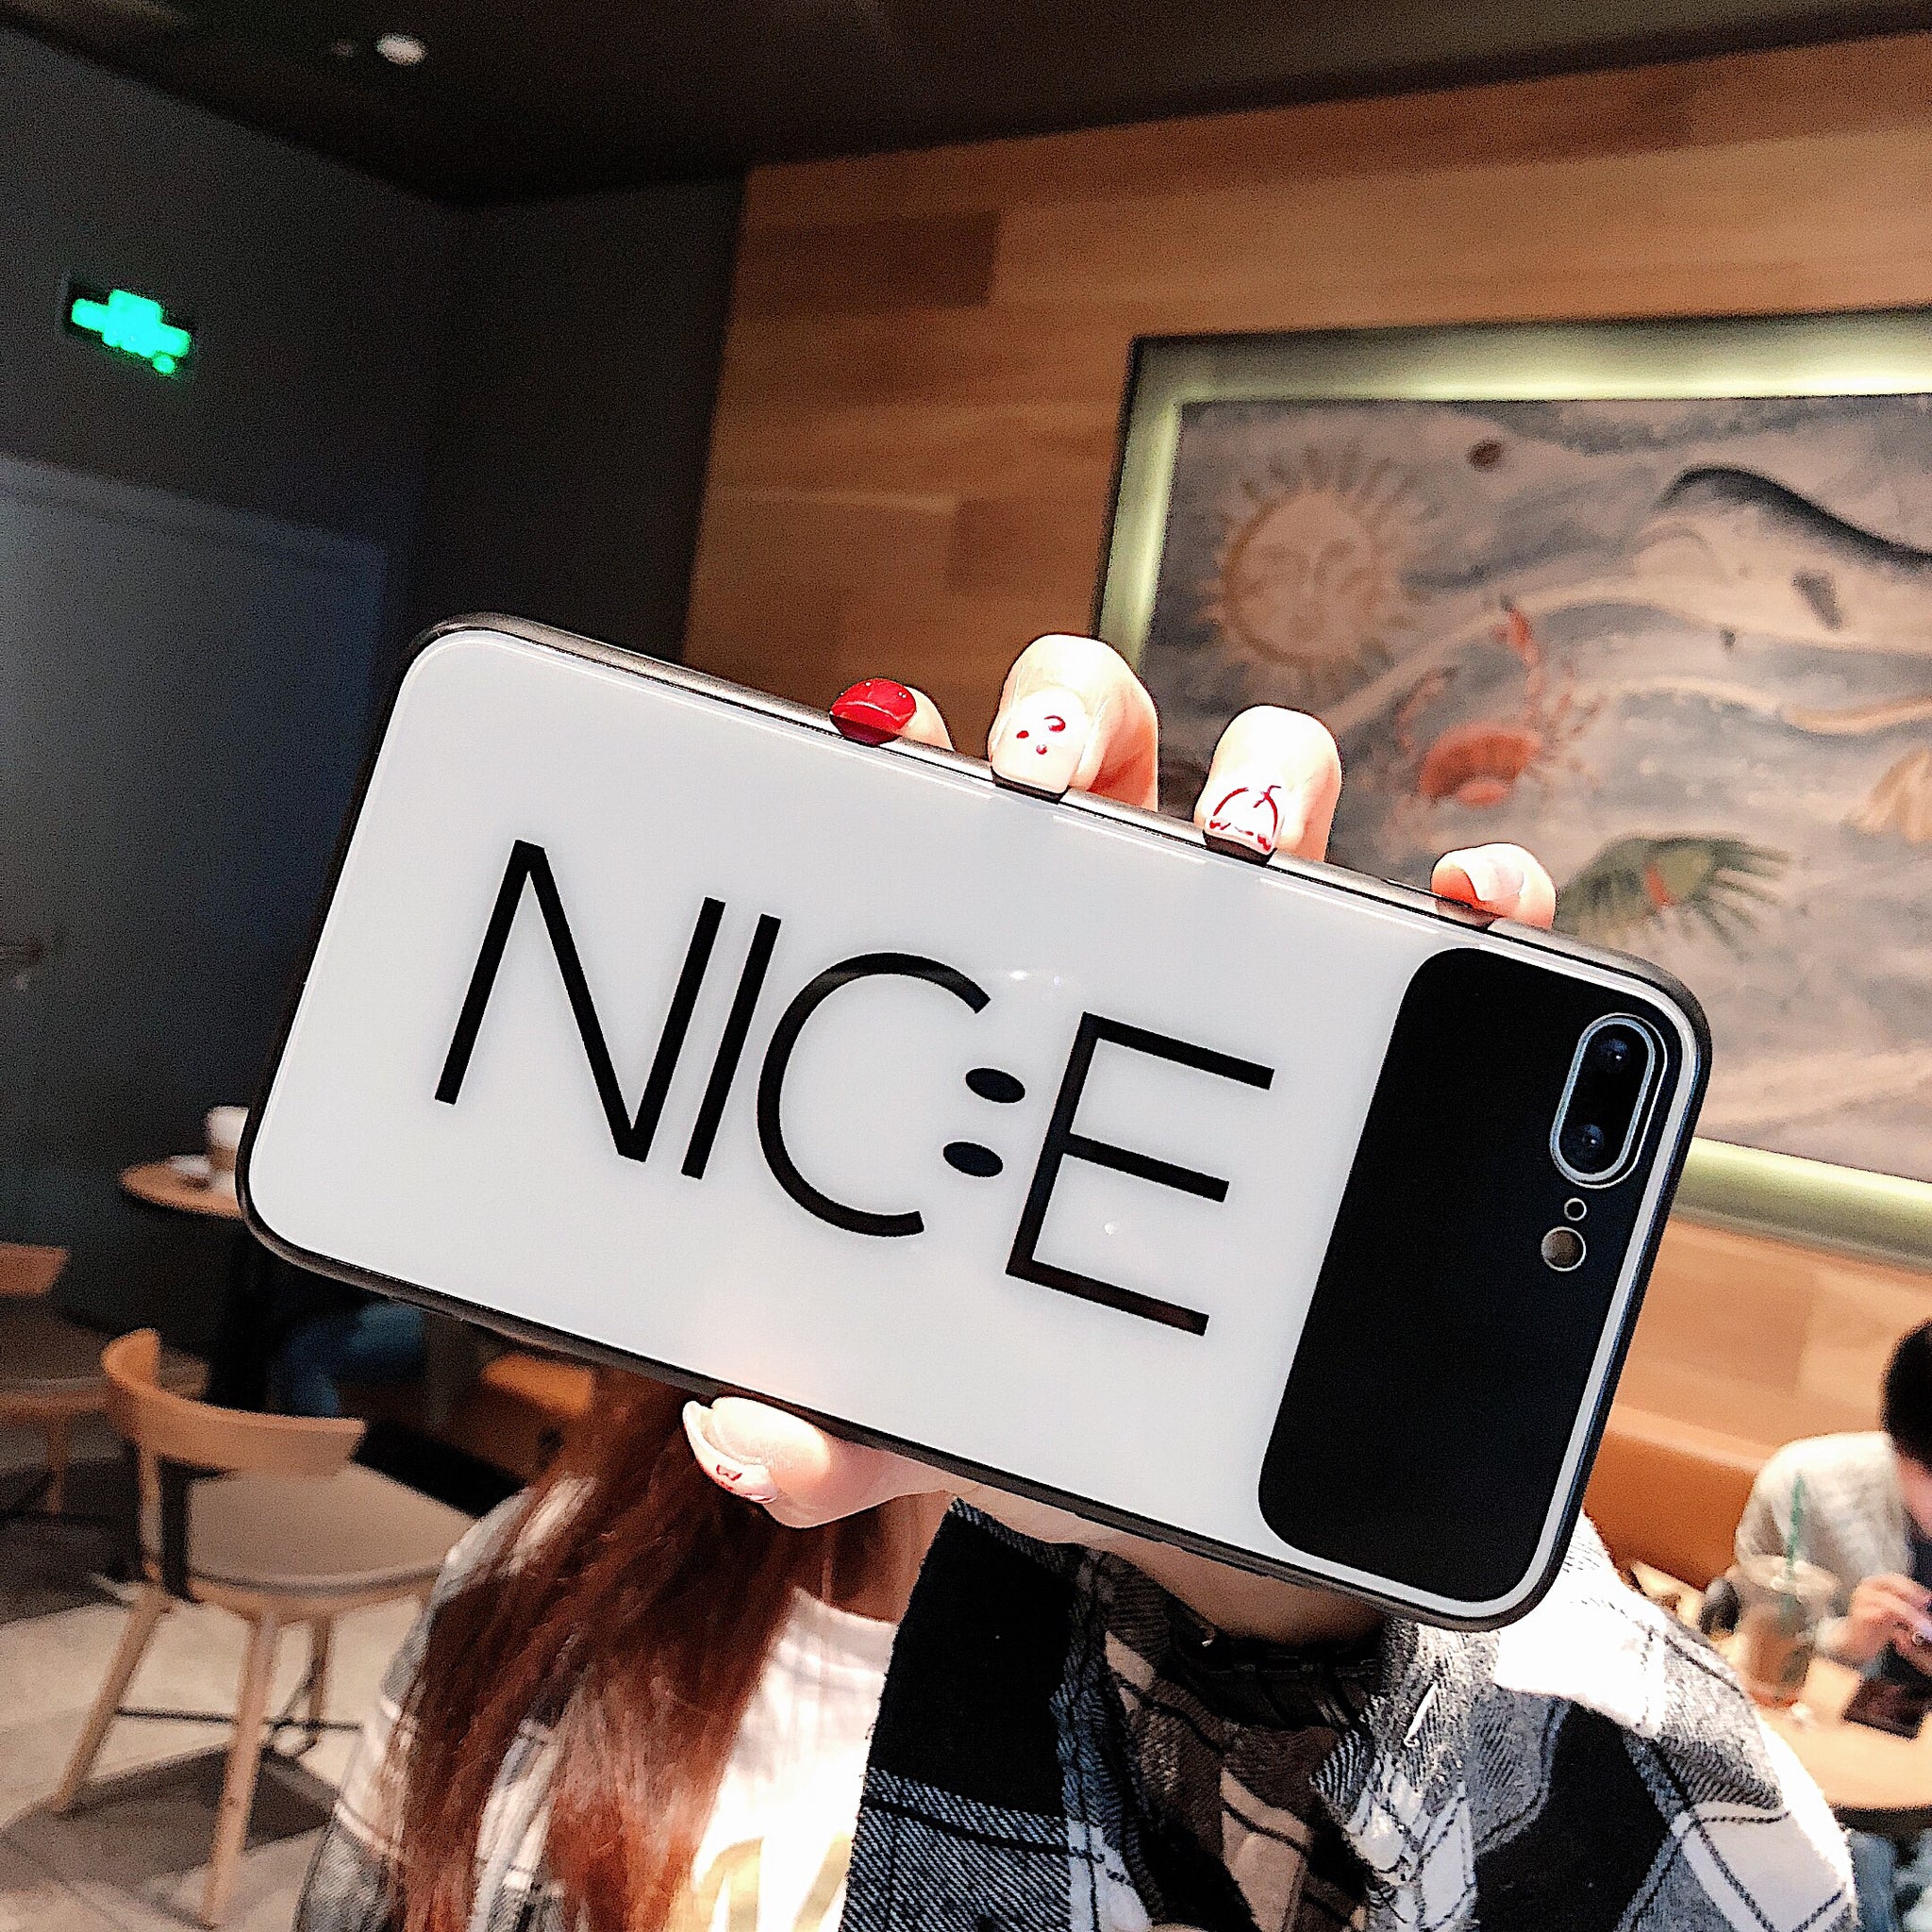 Smiley Face Phone Case for iPhone6/6S, 6/6S PLUS, 7/8, 7/8plus, X/XS, XR, XS MAX Cartoon Chic Mirror Full Protection Anti-falling black ZopiStyle